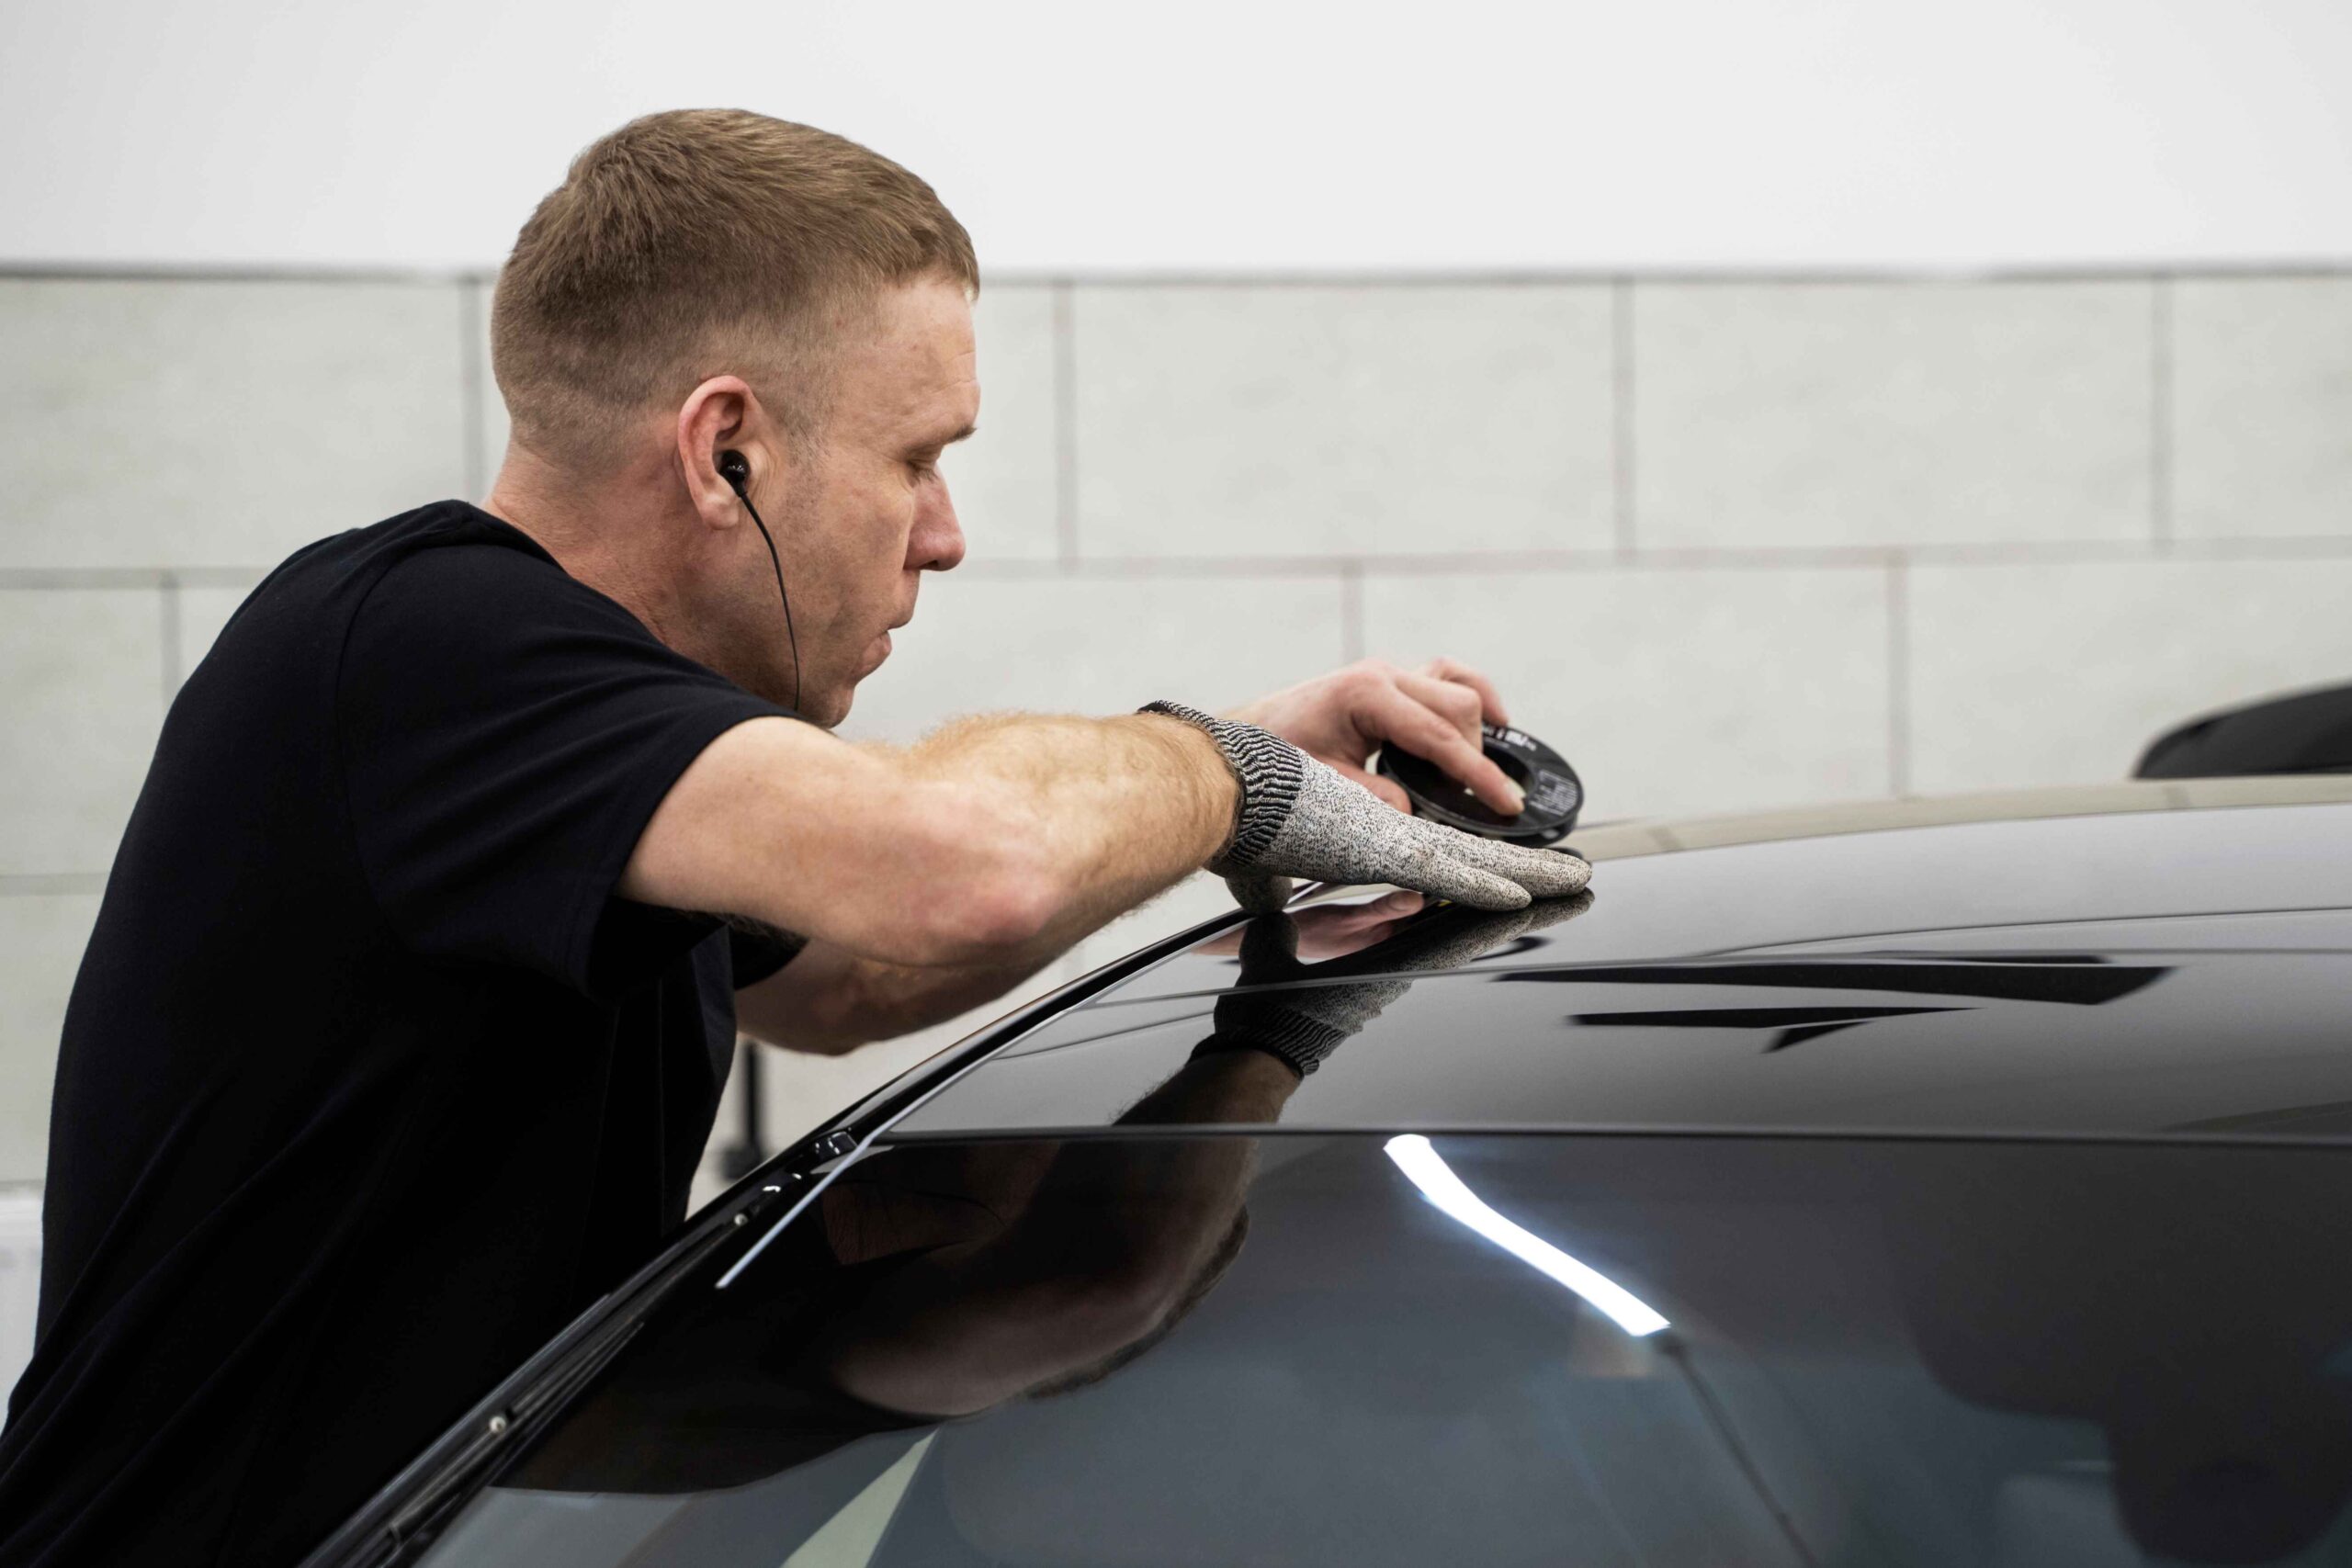 Where to Tint Your Car Window